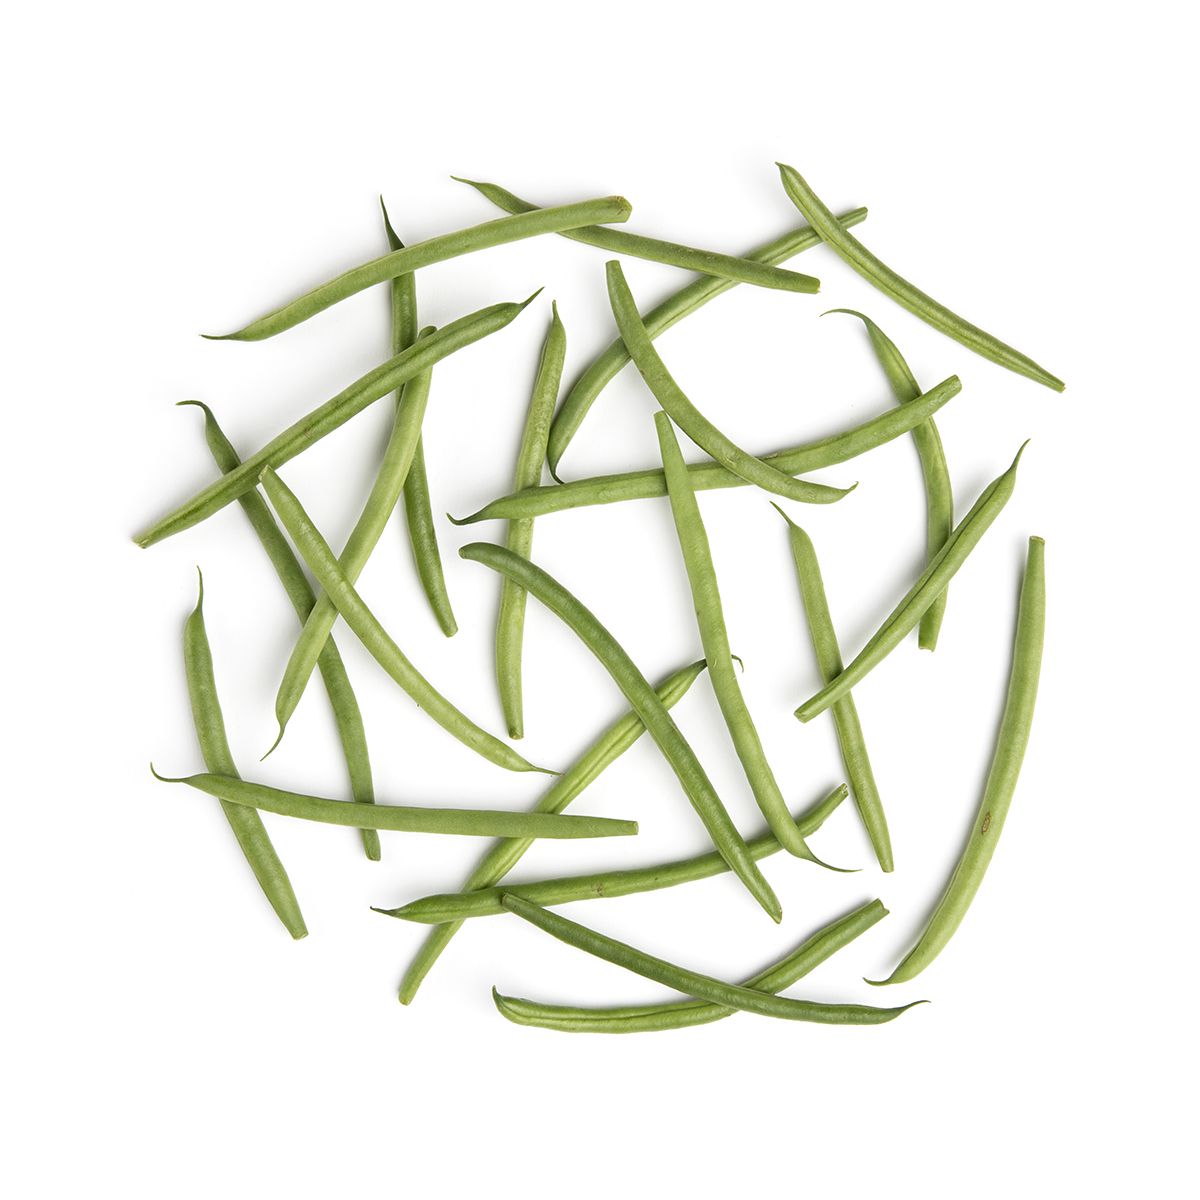 BoxNCase Snipped One End Haricots Verts / French Beans